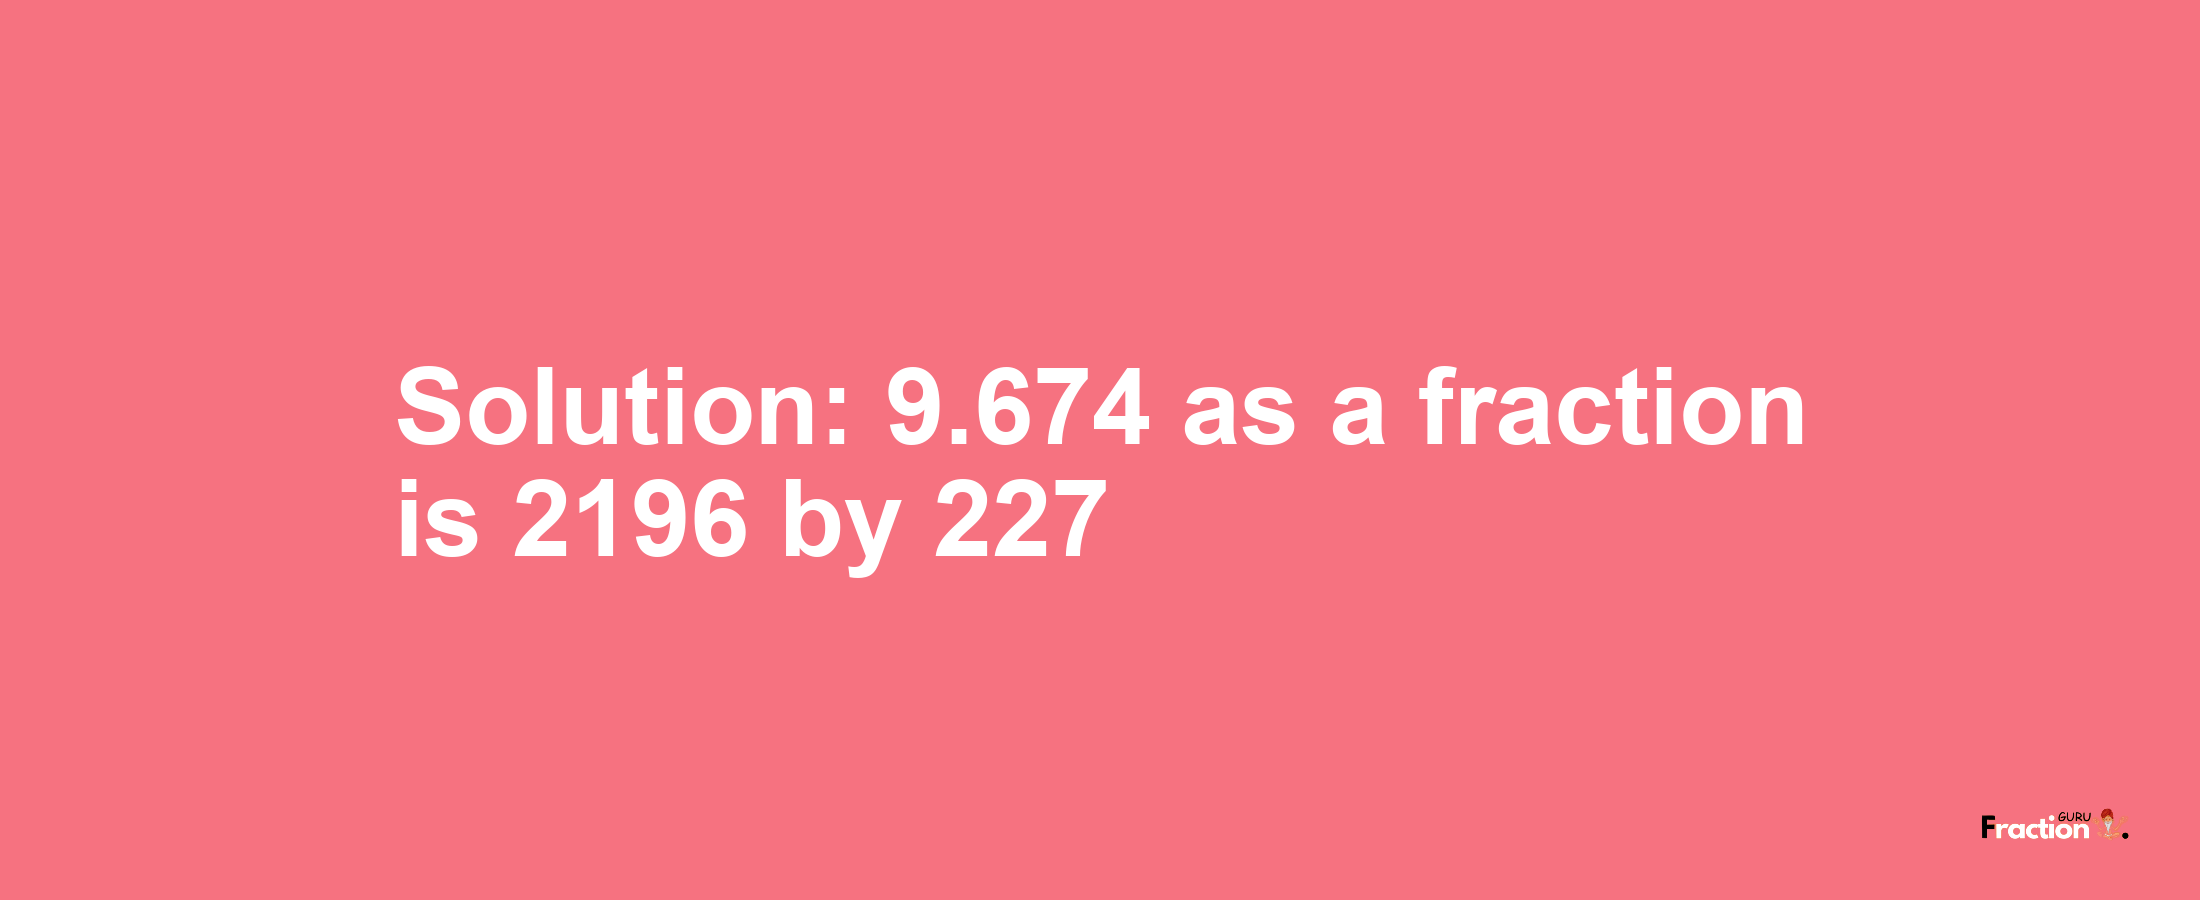 Solution:9.674 as a fraction is 2196/227